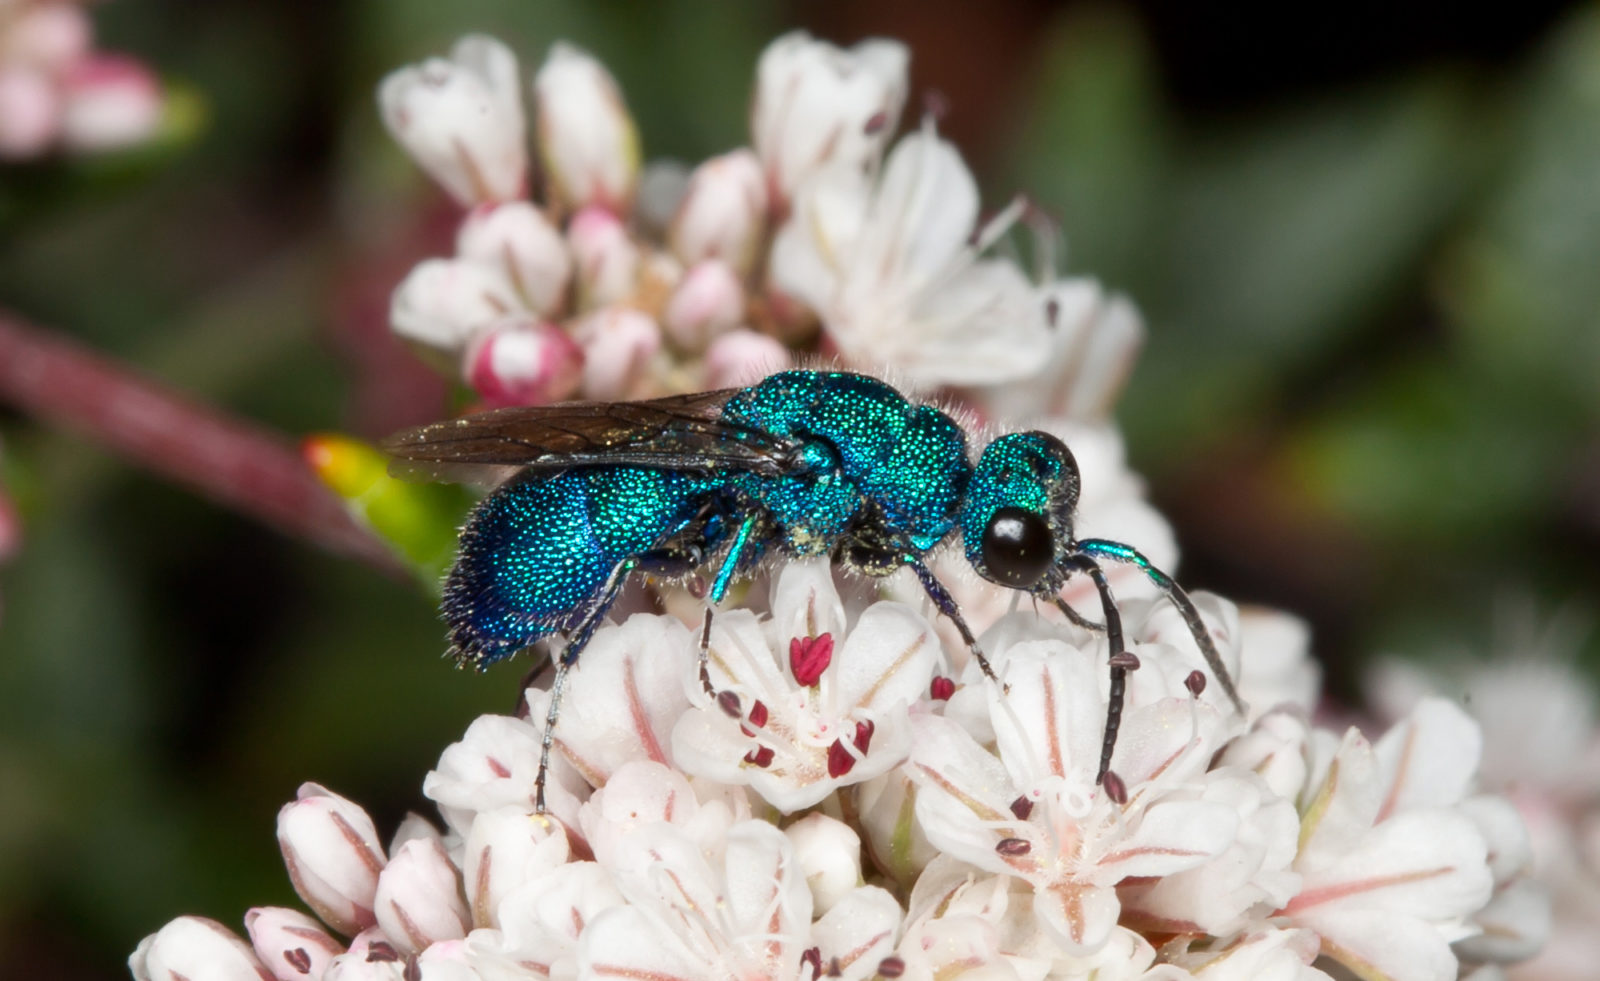 What are you doing here? Cuckoo Wasp in a box - Bug News